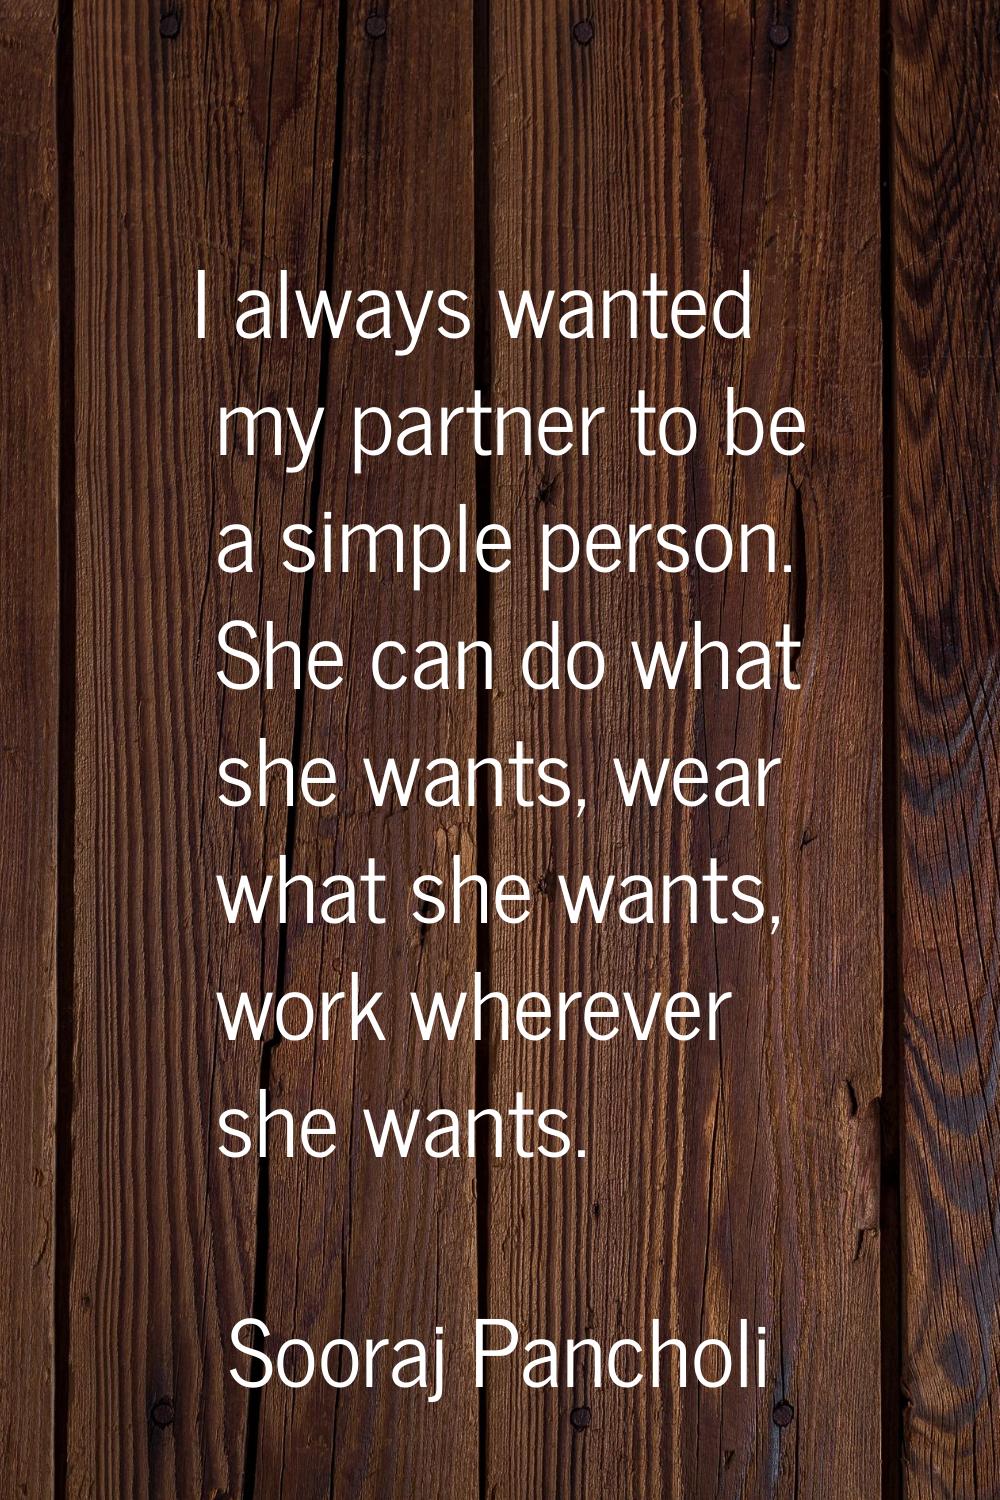 I always wanted my partner to be a simple person. She can do what she wants, wear what she wants, w